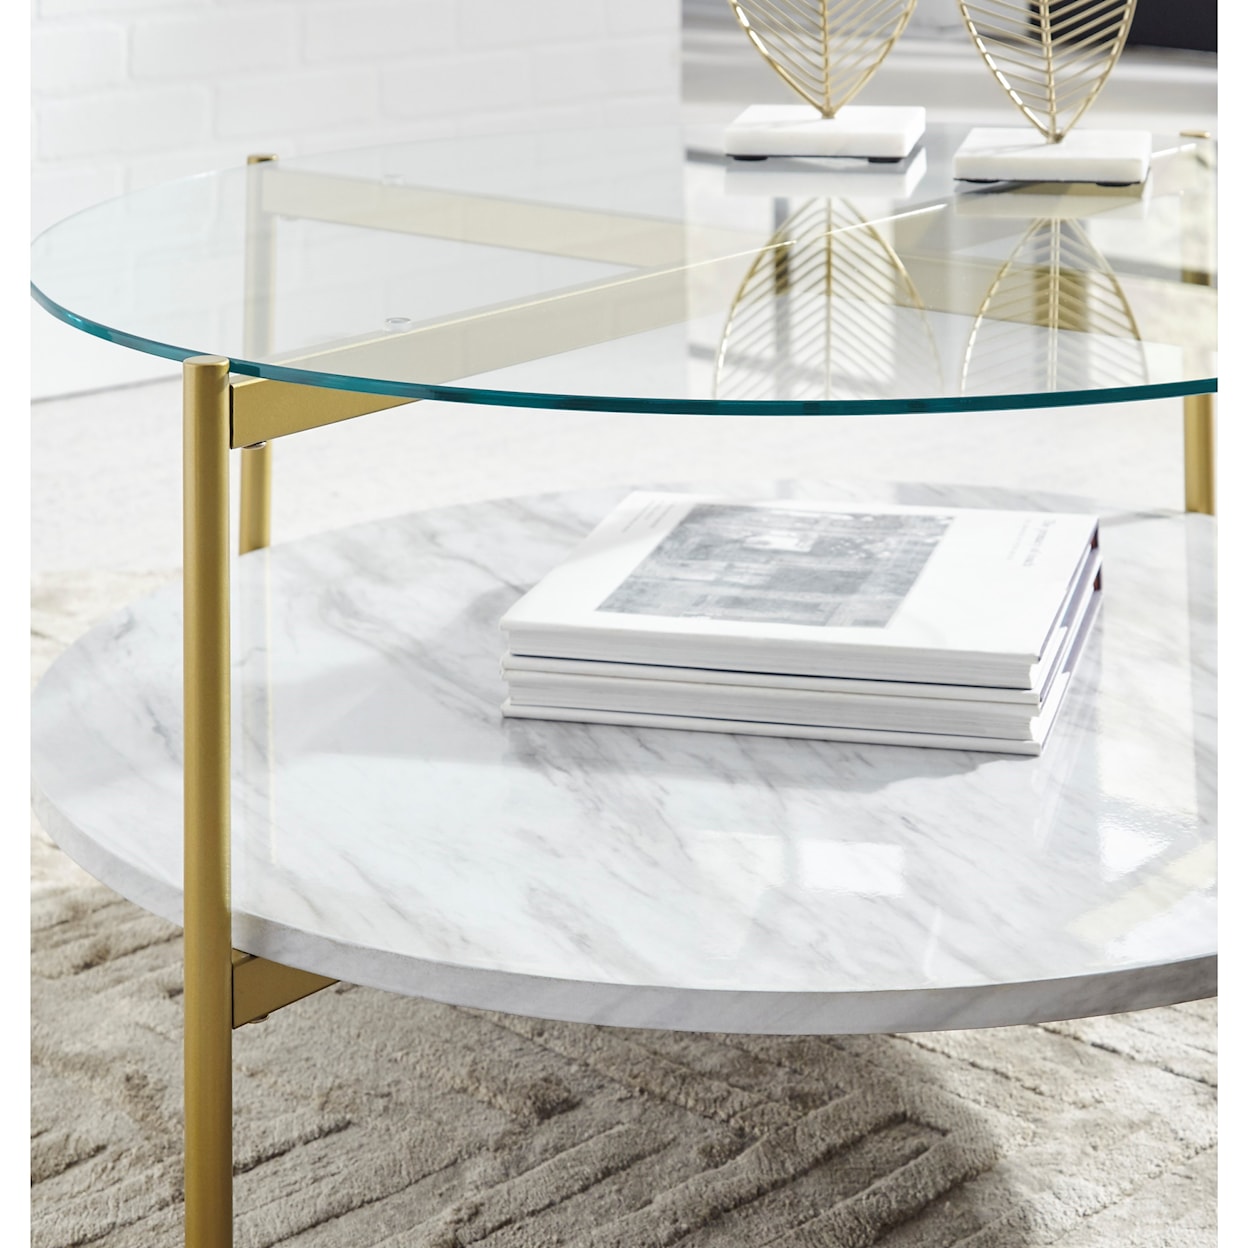 Michael Alan Select Wynora Round Cocktail Table